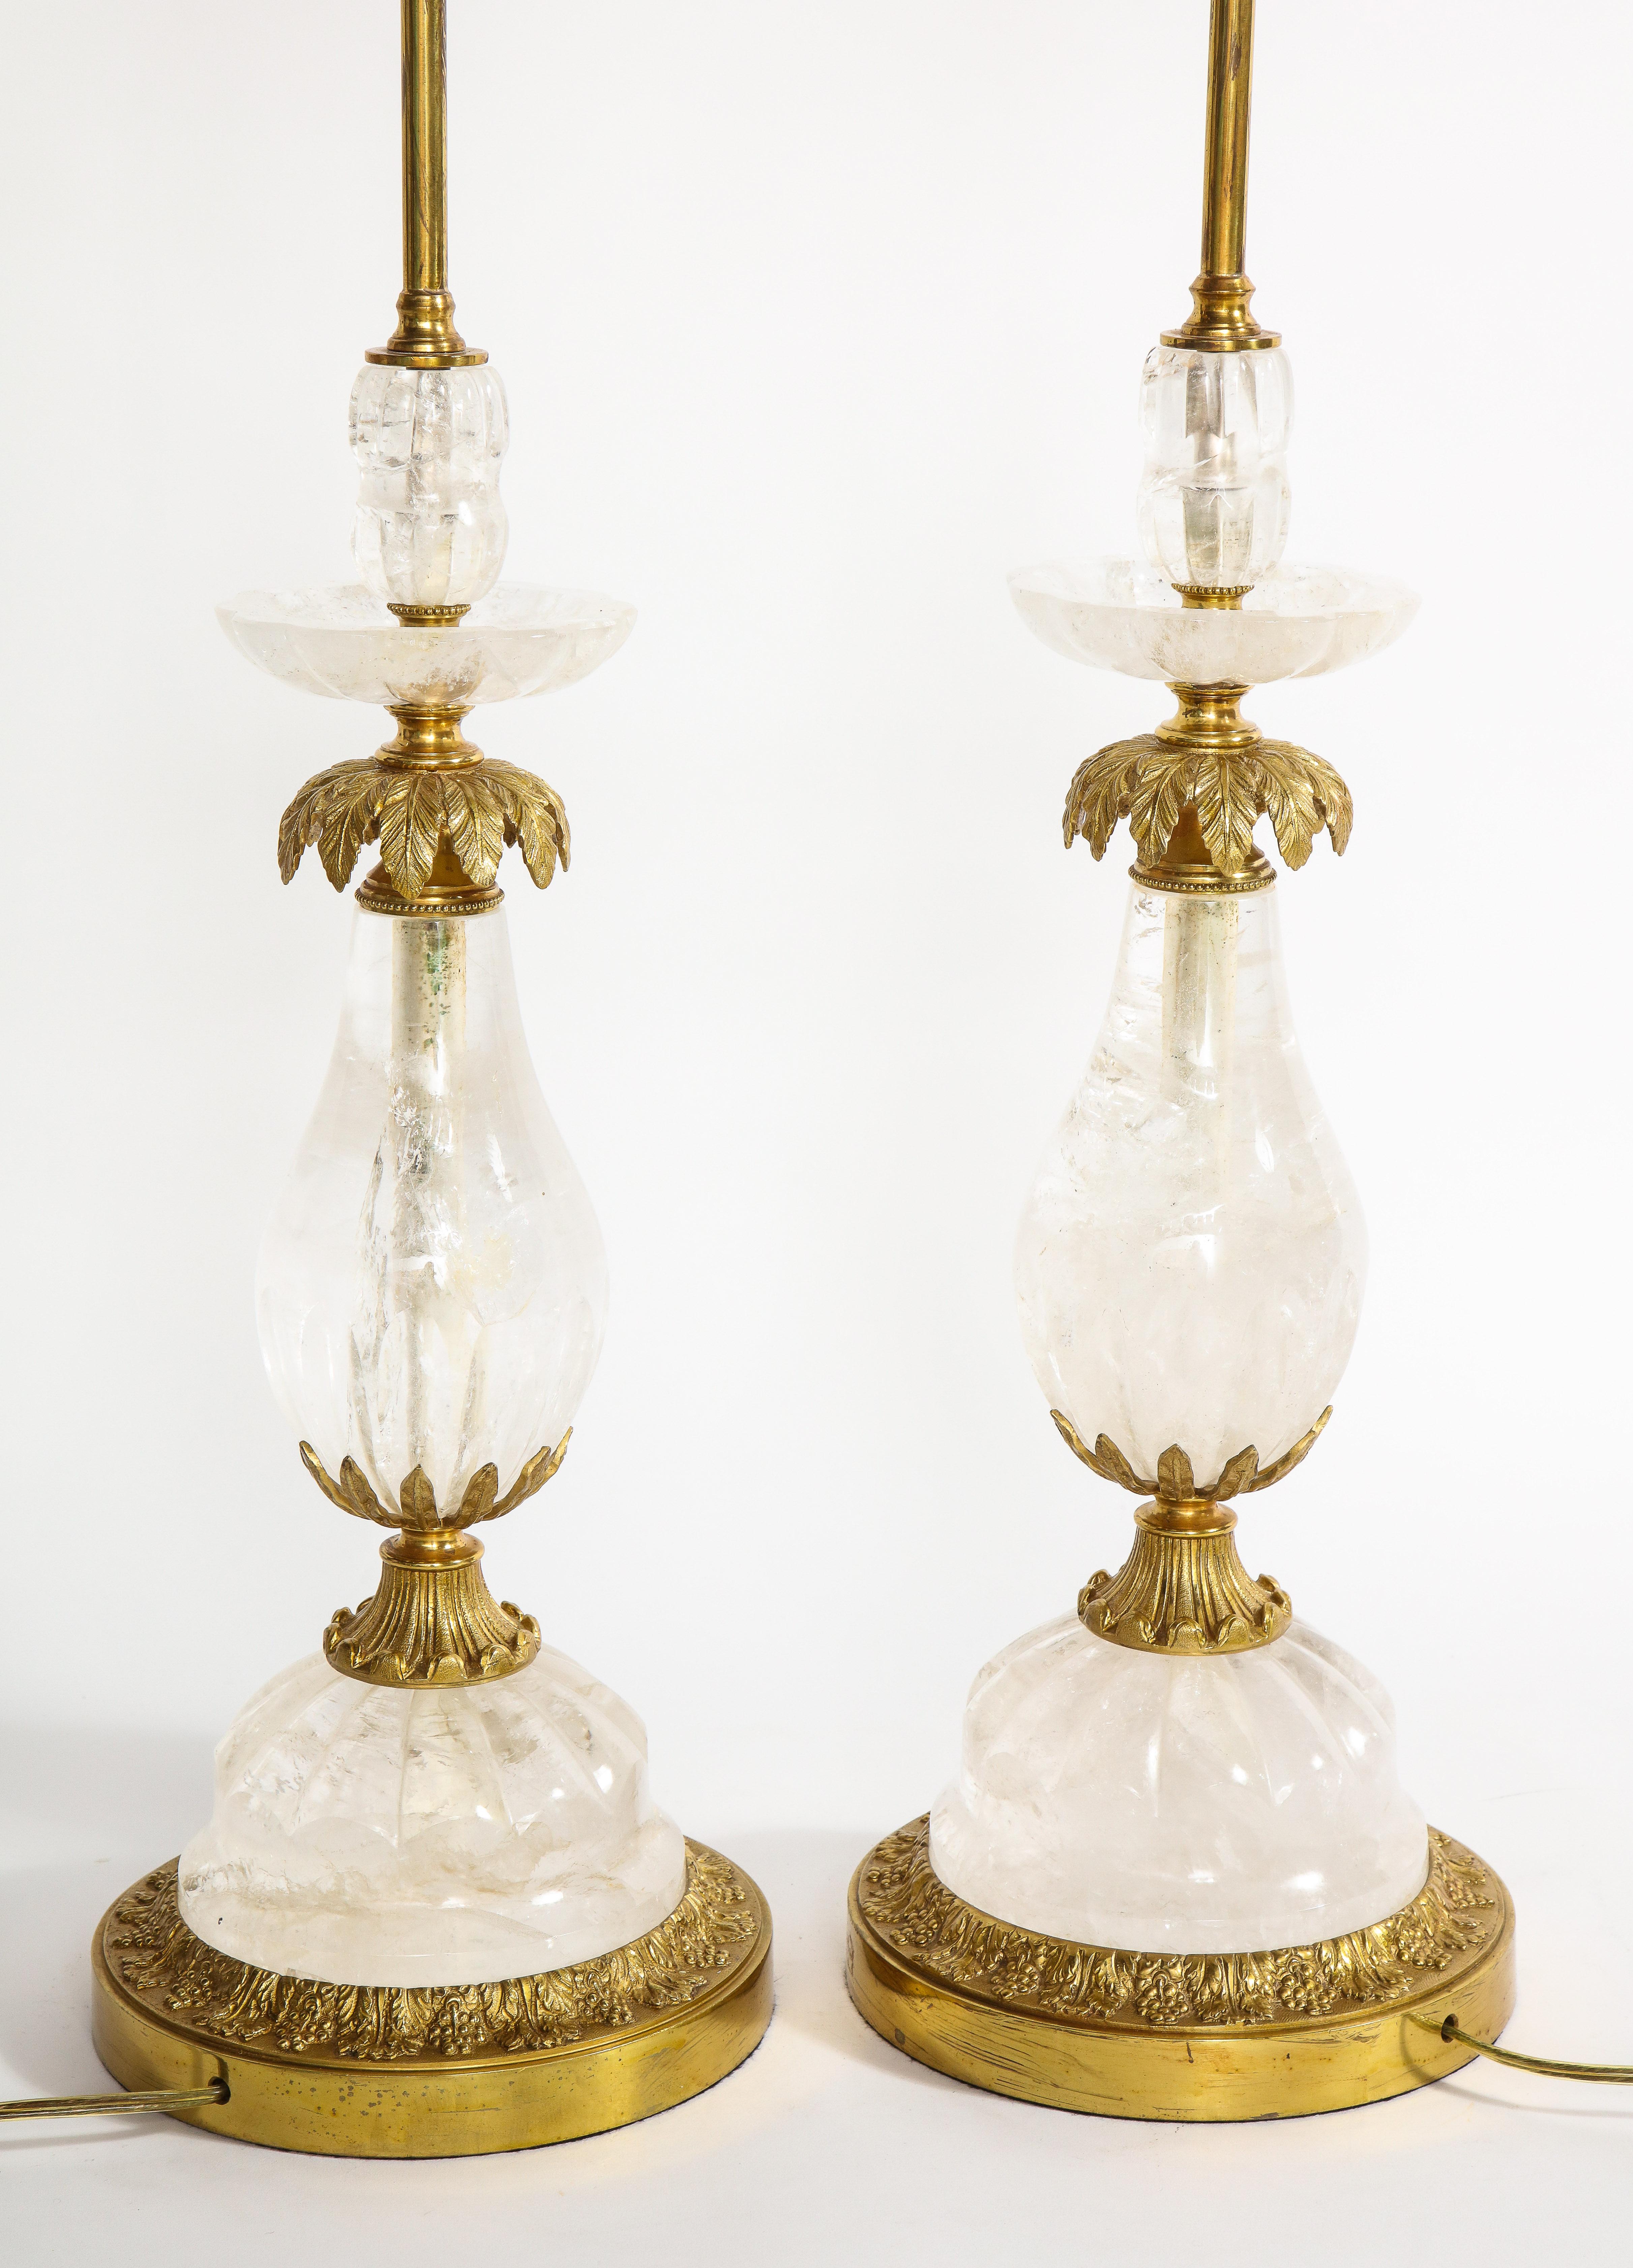 Pair of Art Deco Ormolu Mounted Palm Tree Form Rock Crystal Quartz Lamps For Sale 5